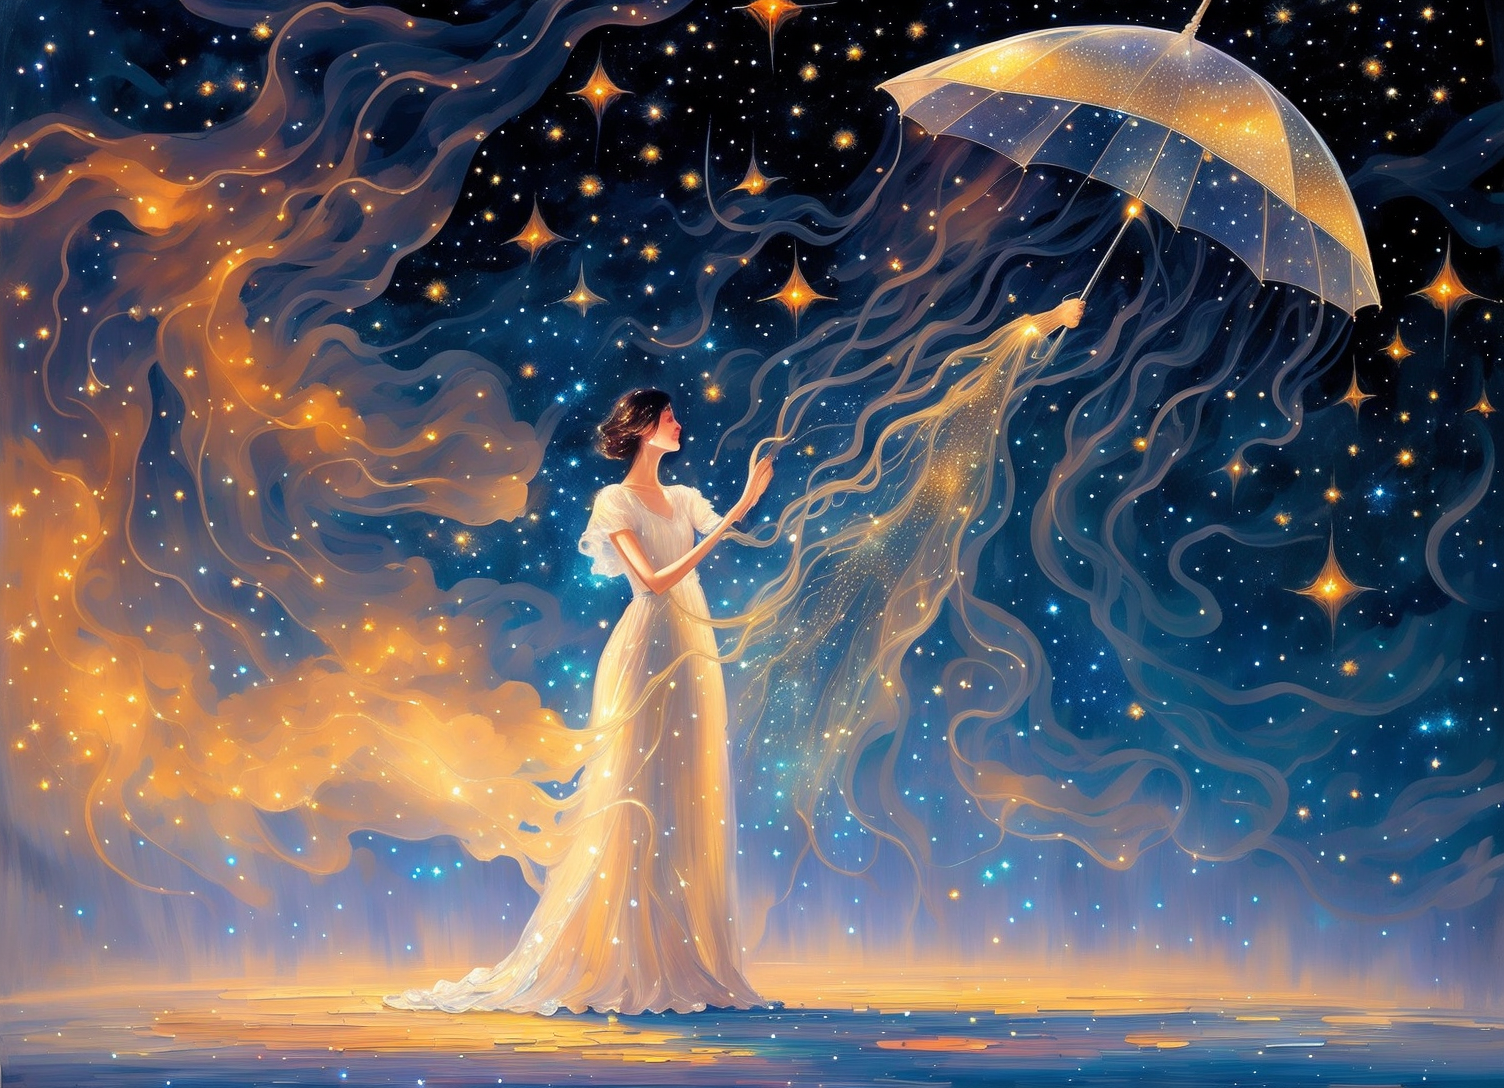 oil painting space art of a closeup woman in the night sky in a white and (golden:0.9) dress and (holding) a large transpa...